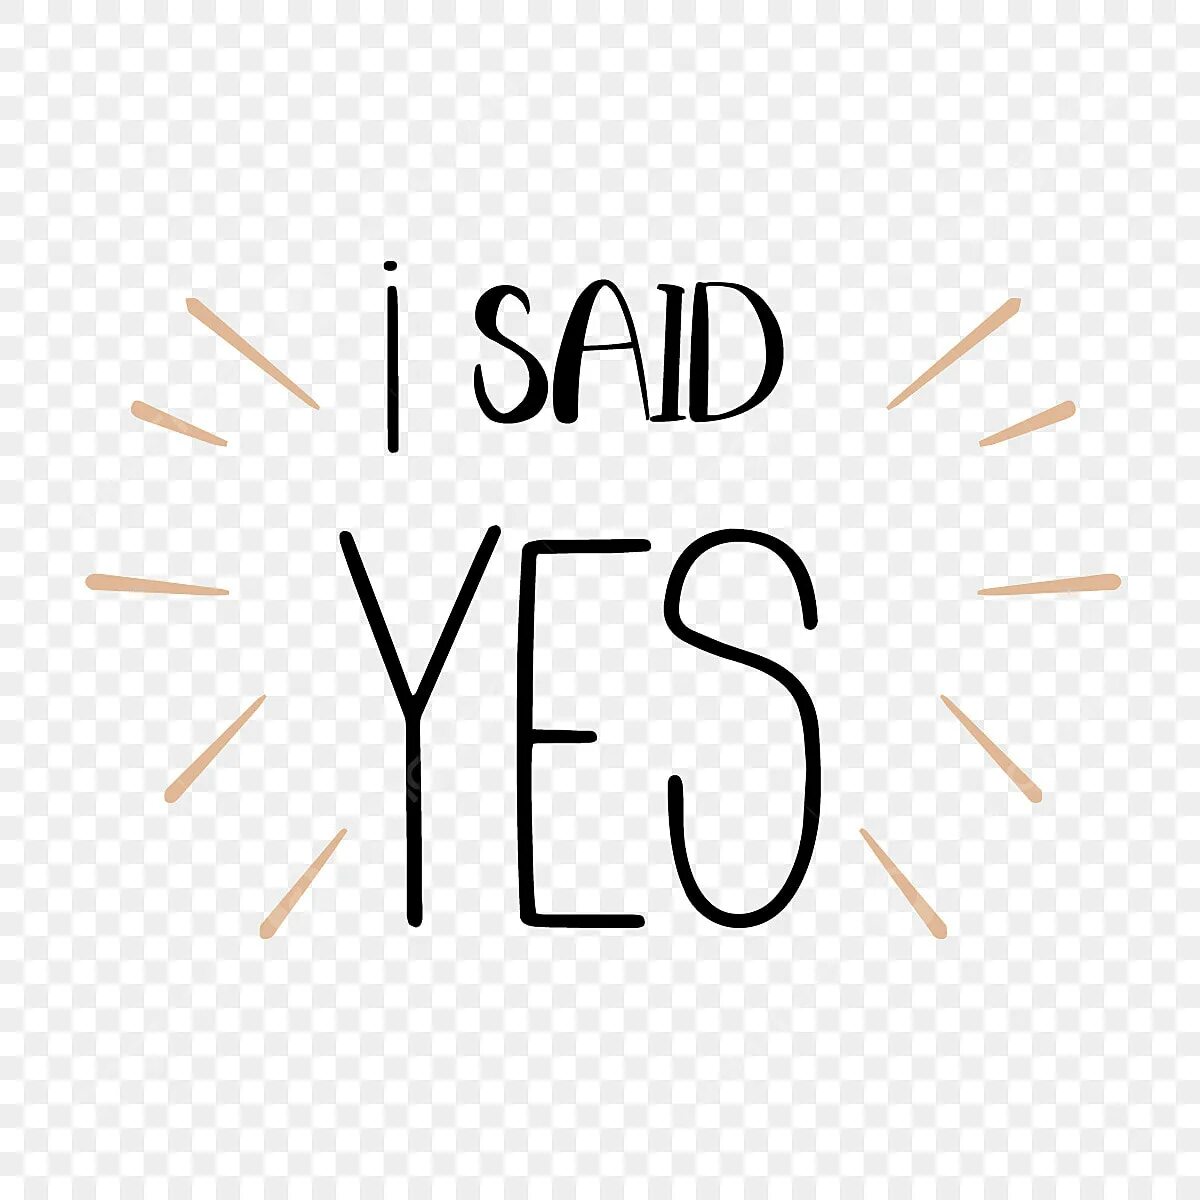 L say like. Say Yes. I said Yes. I say Yes вектор. Just say Yes фирма.